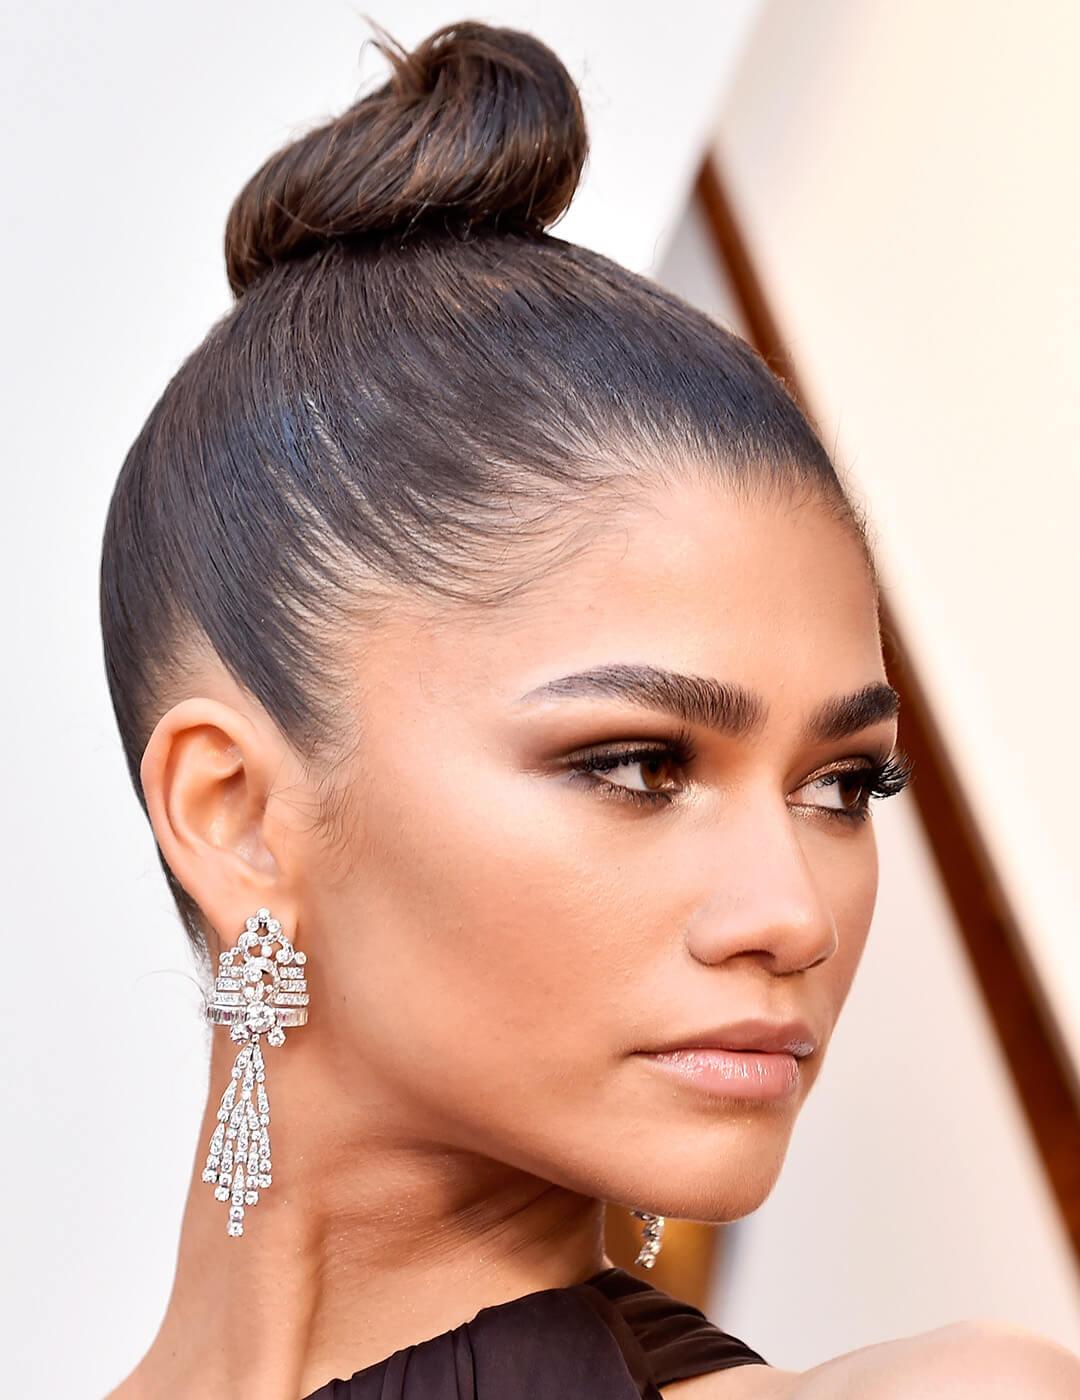 A close-up photo of Zendaya with her sleek and chic top knot hairstyle showing her facial features and silver earring